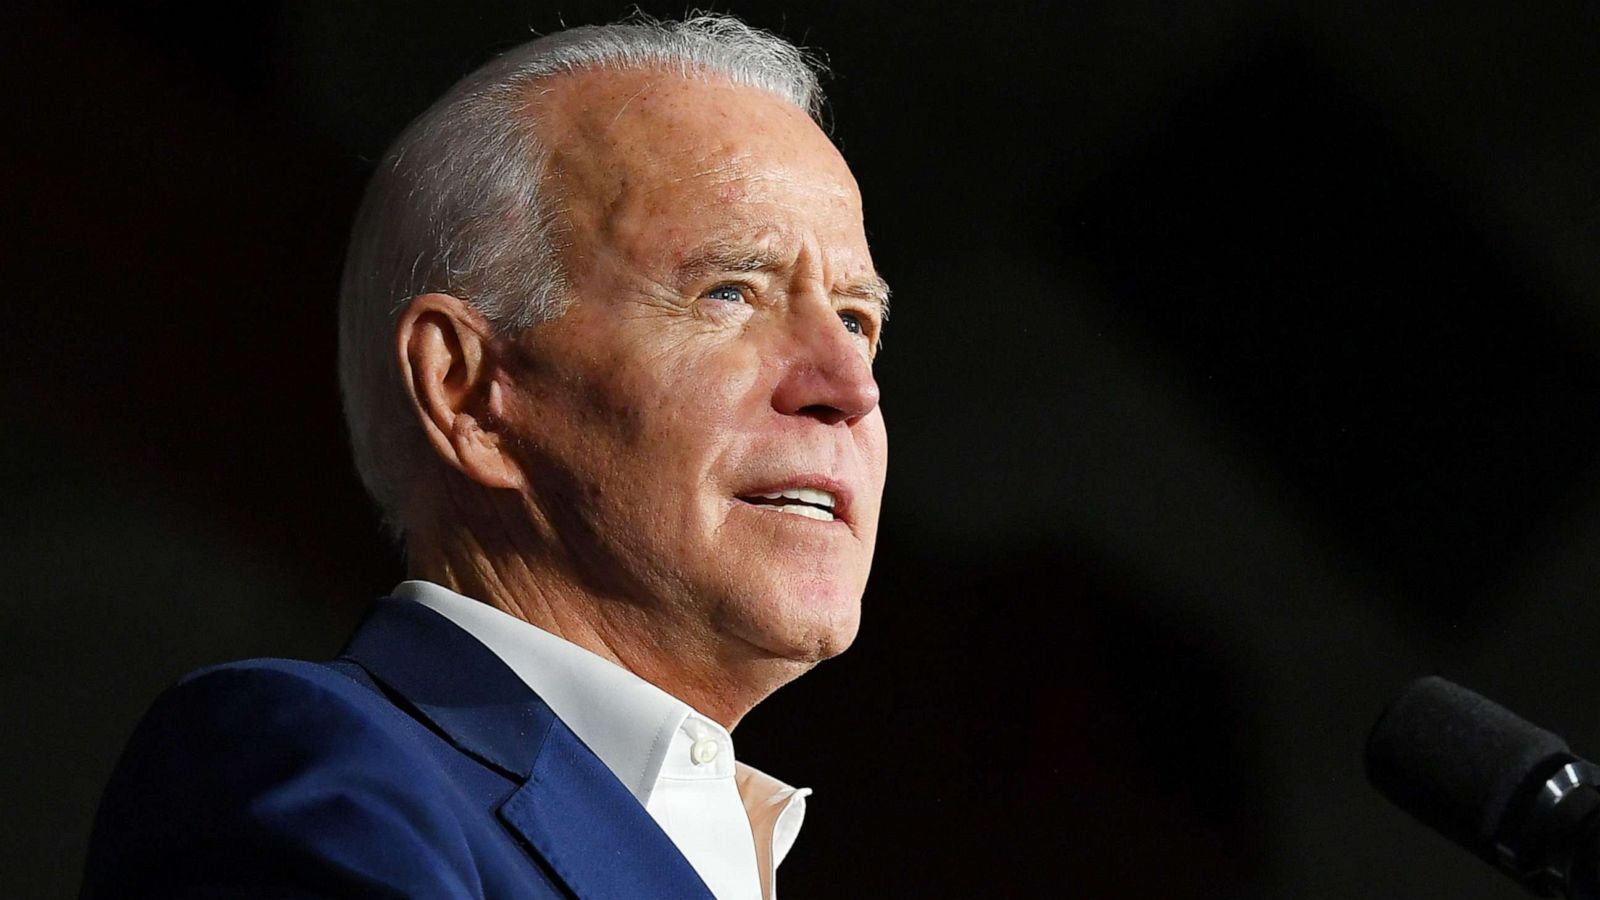 Biden consolidates support, but trails badly in enthusiasm: Poll